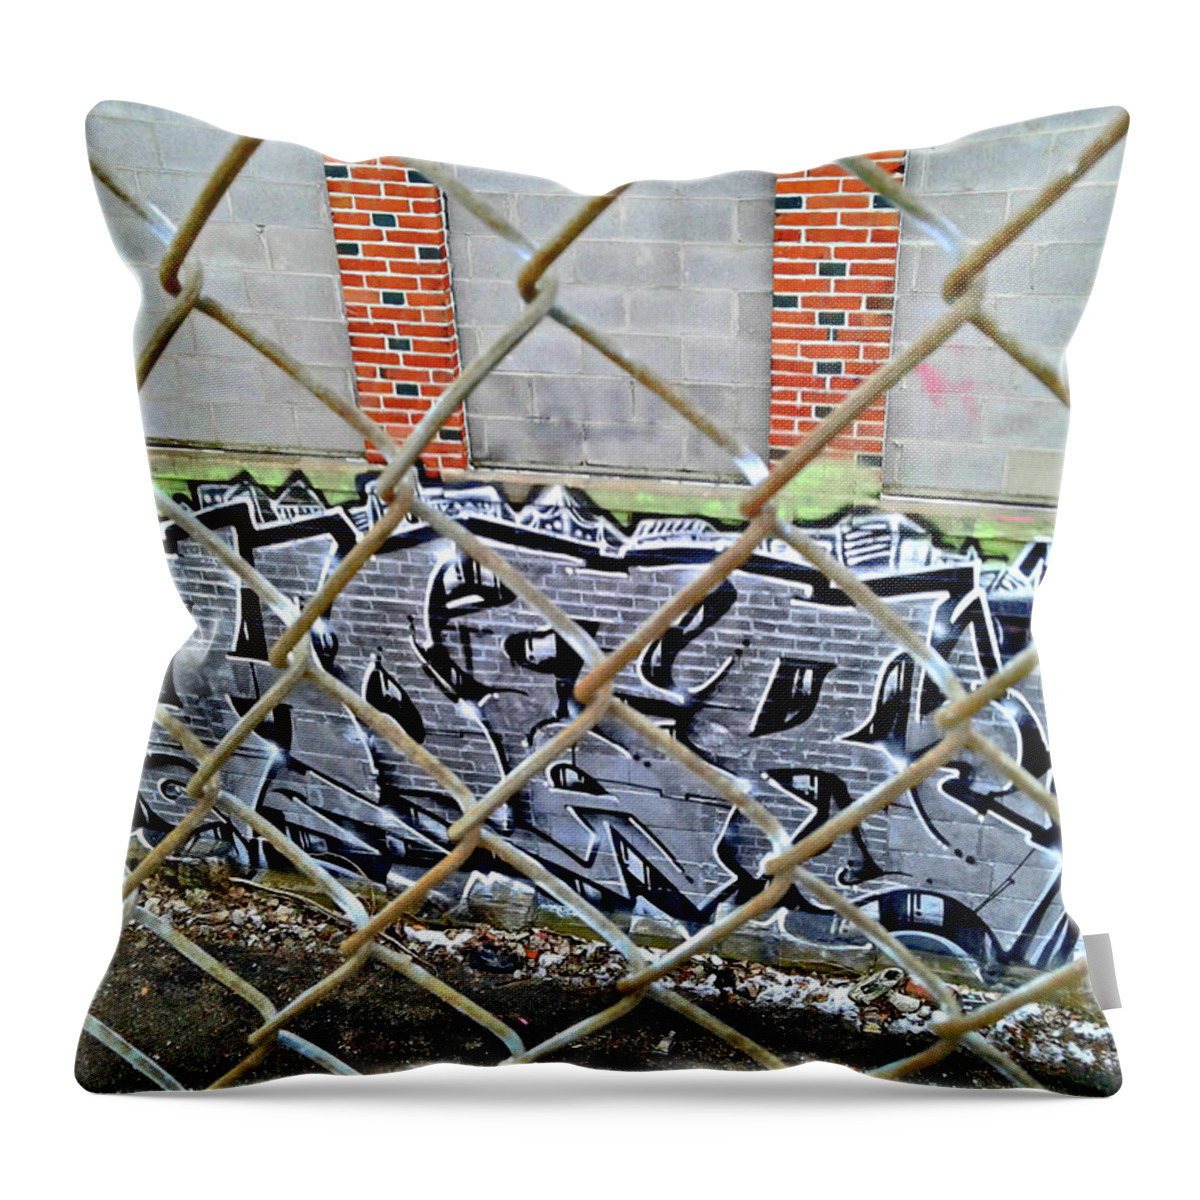 Graffiti Artists Throw Pillow featuring the painting The Overpass by Anitra Handley-Boyt